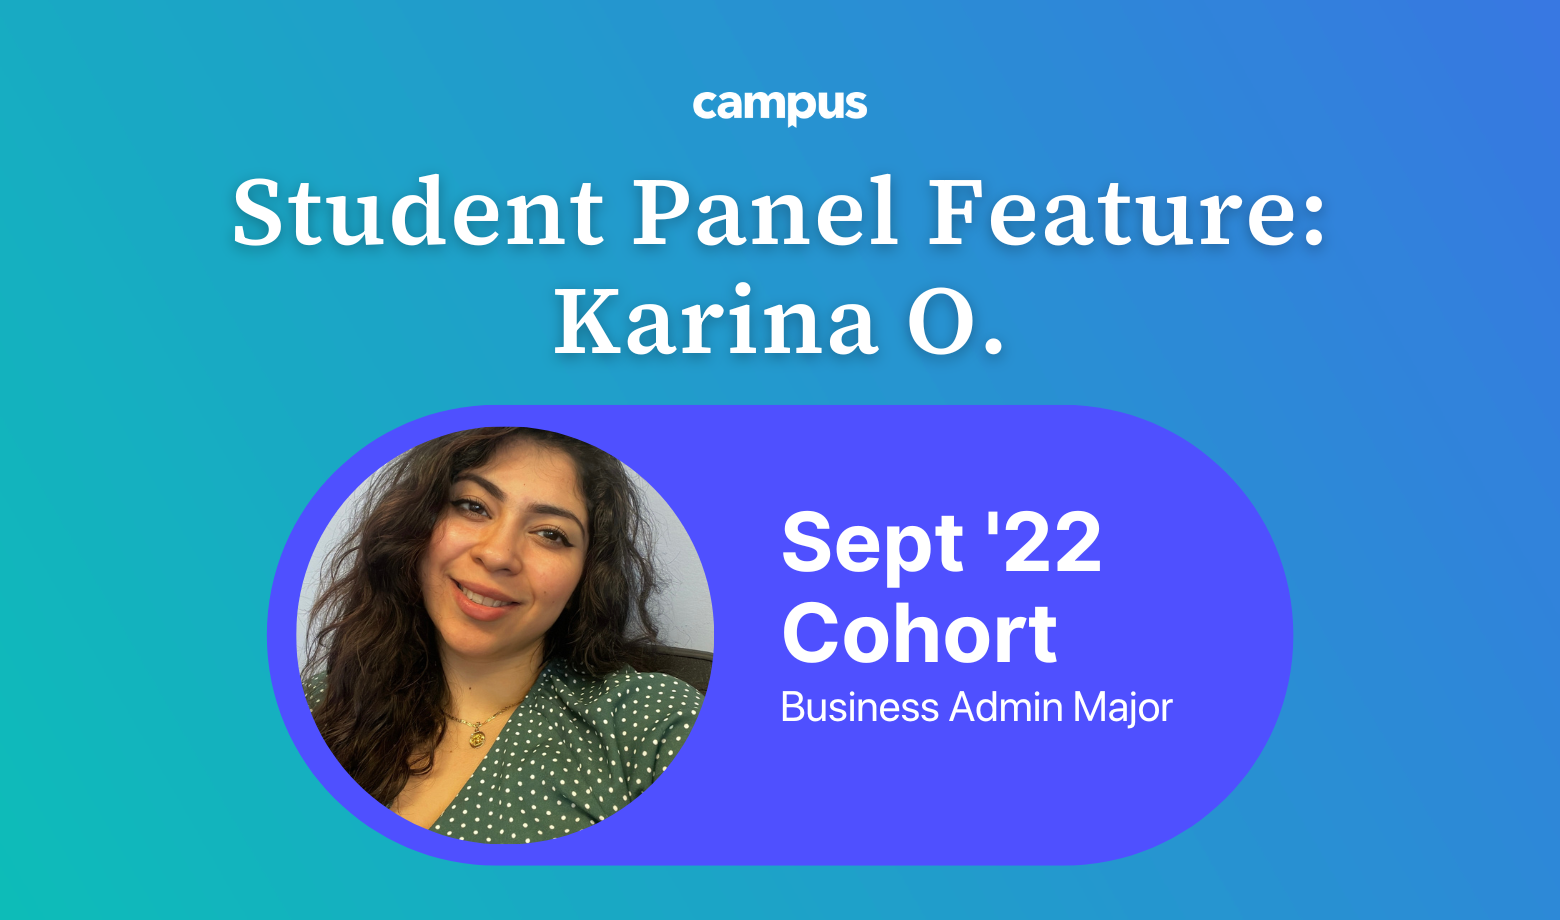 Campus Student Panel Feature: Meet Karina O. from Illinois